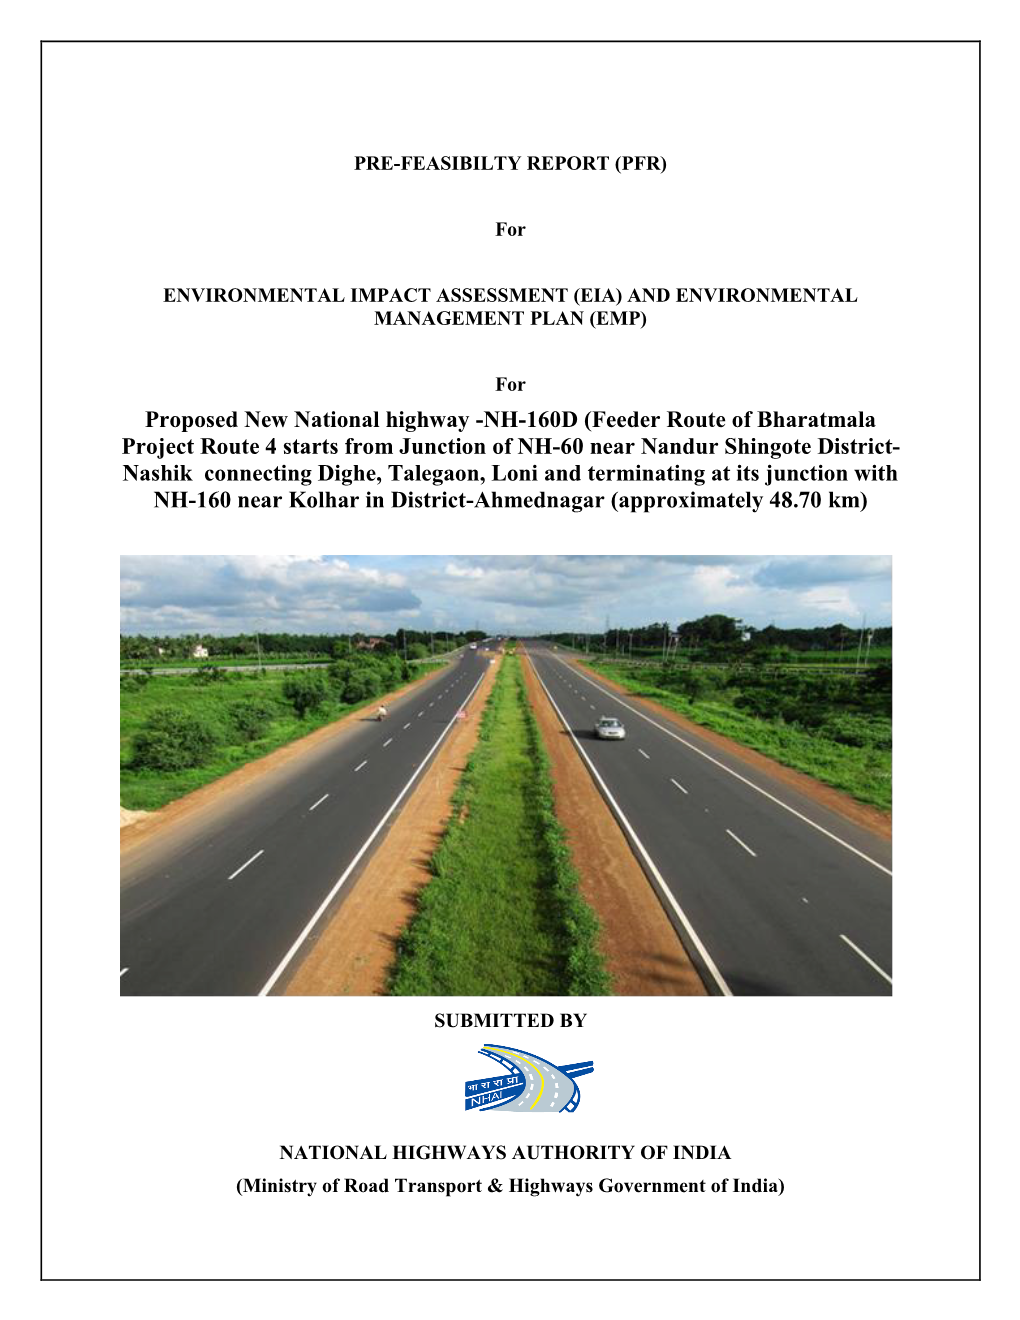 Proposed New National Highway -NH-160D (Feeder Route Of